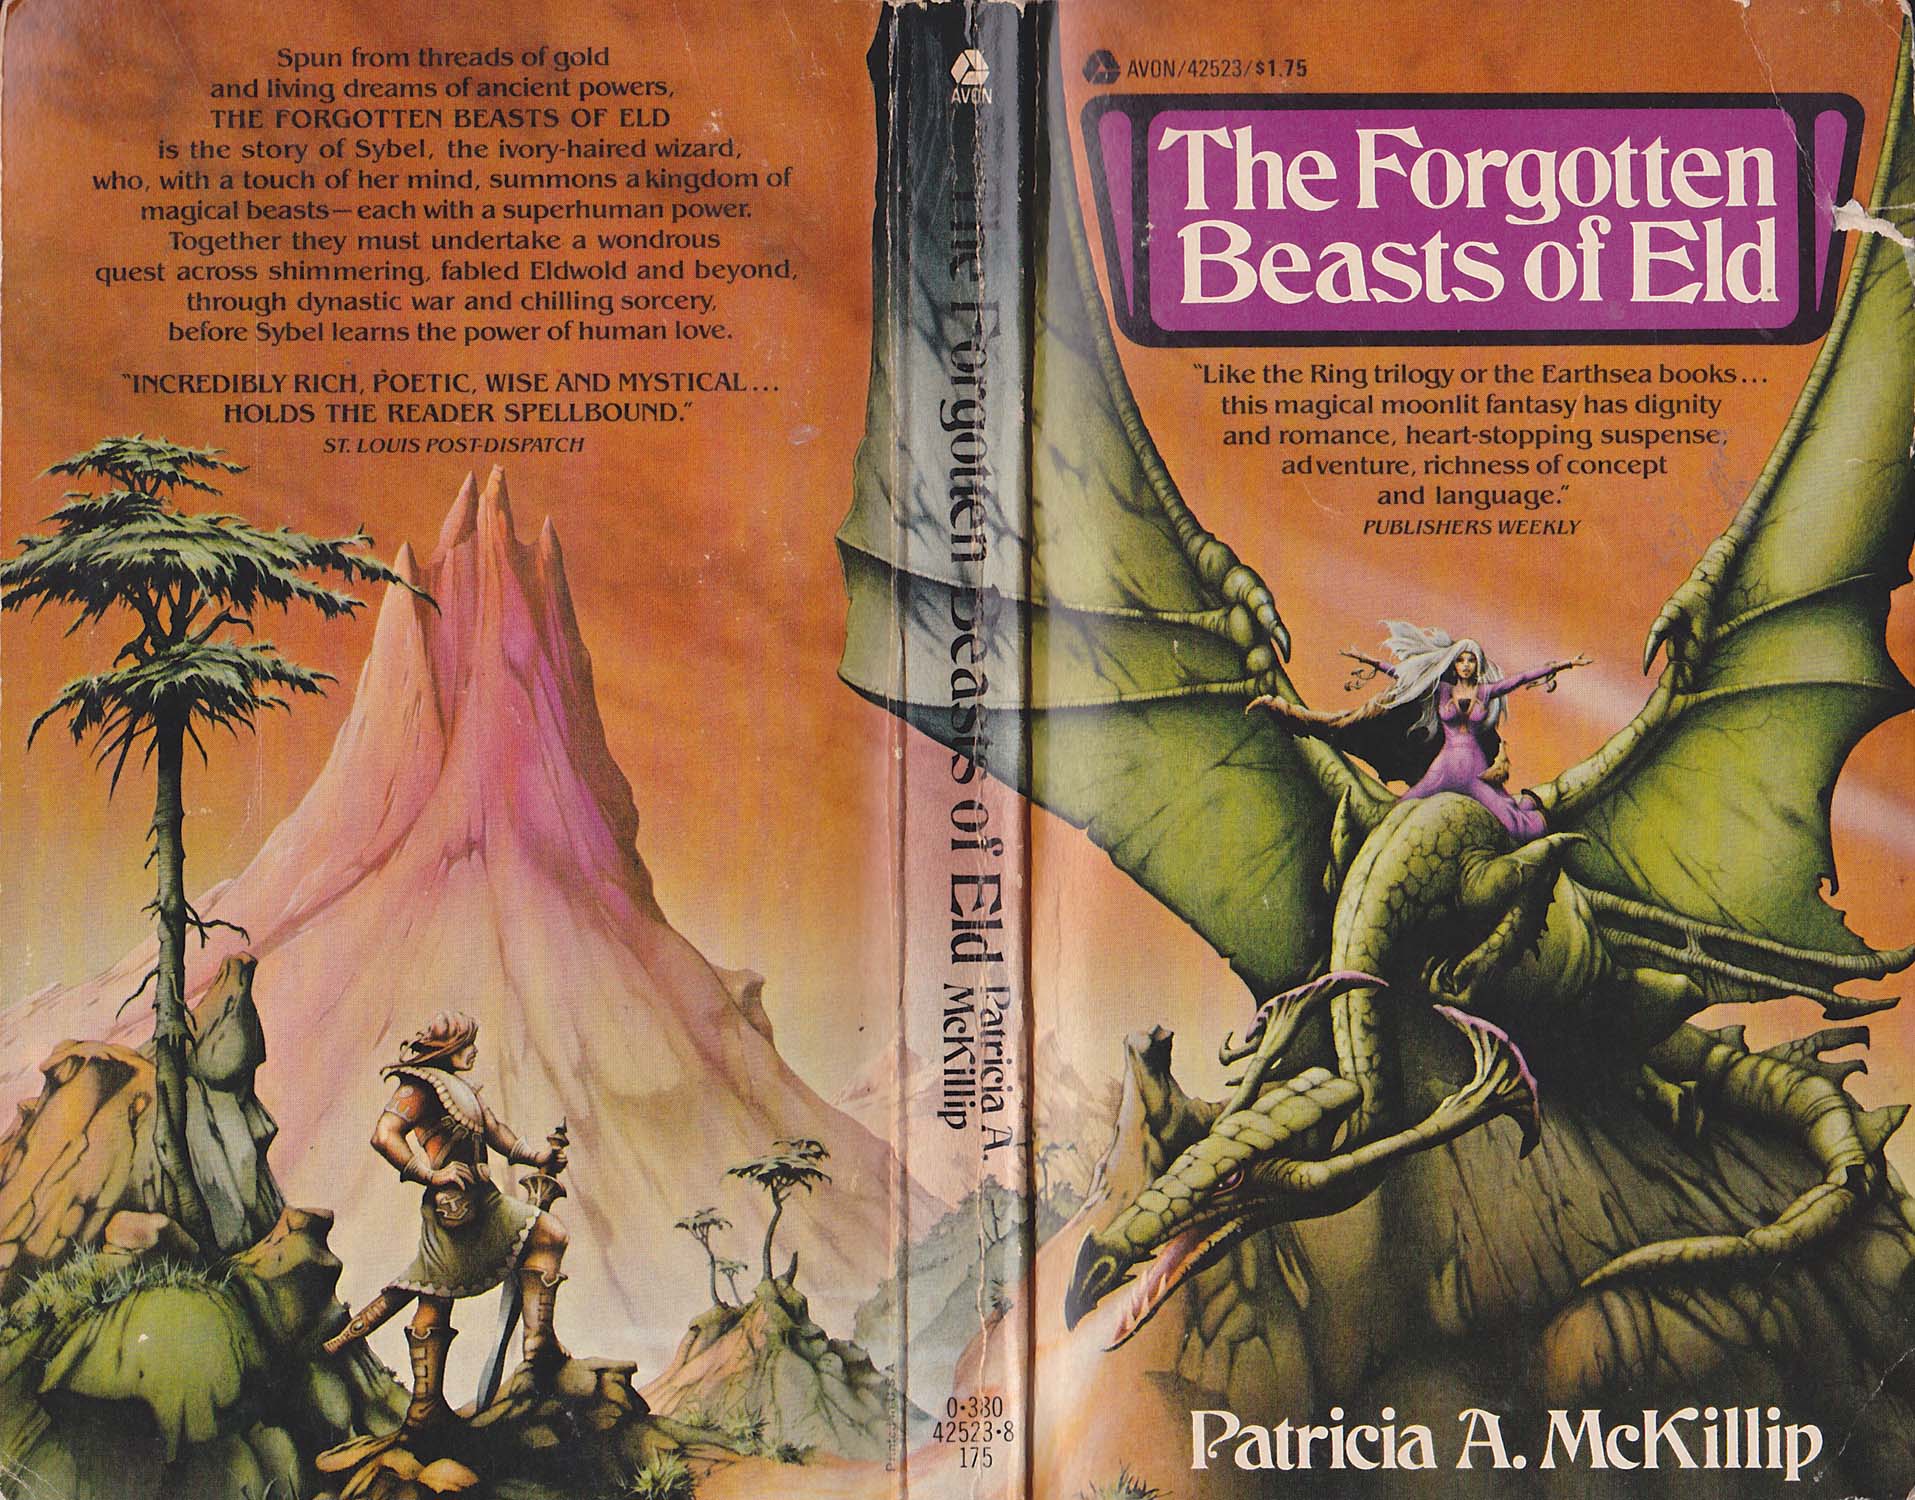 the forgotten beasts of eld by patricia mckillip